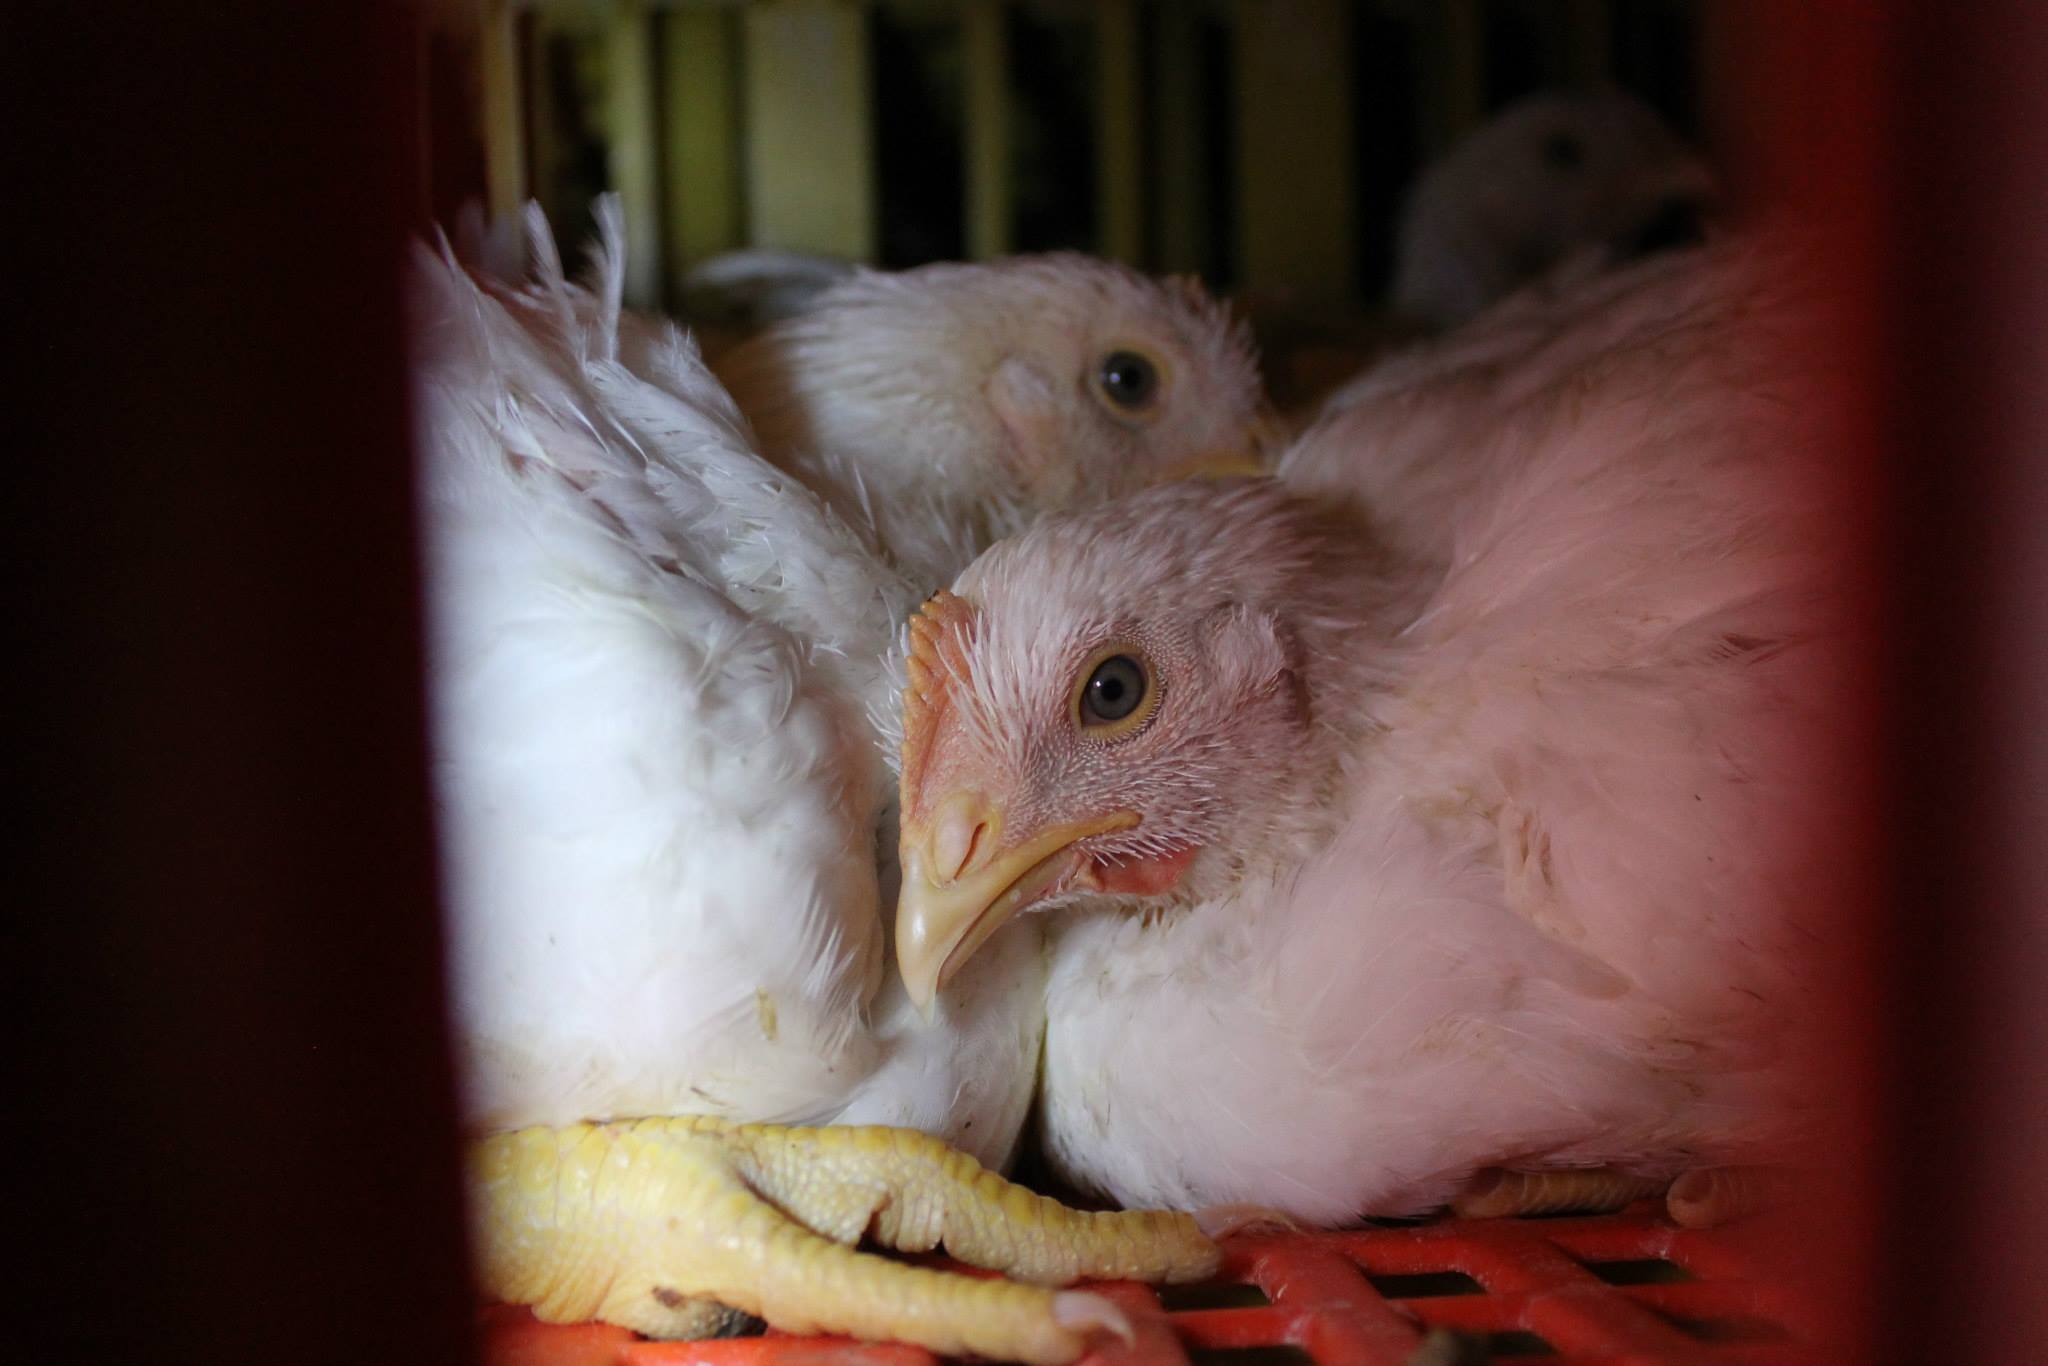 Canadians Killed More Than 750 Million Animals For Food in 2015